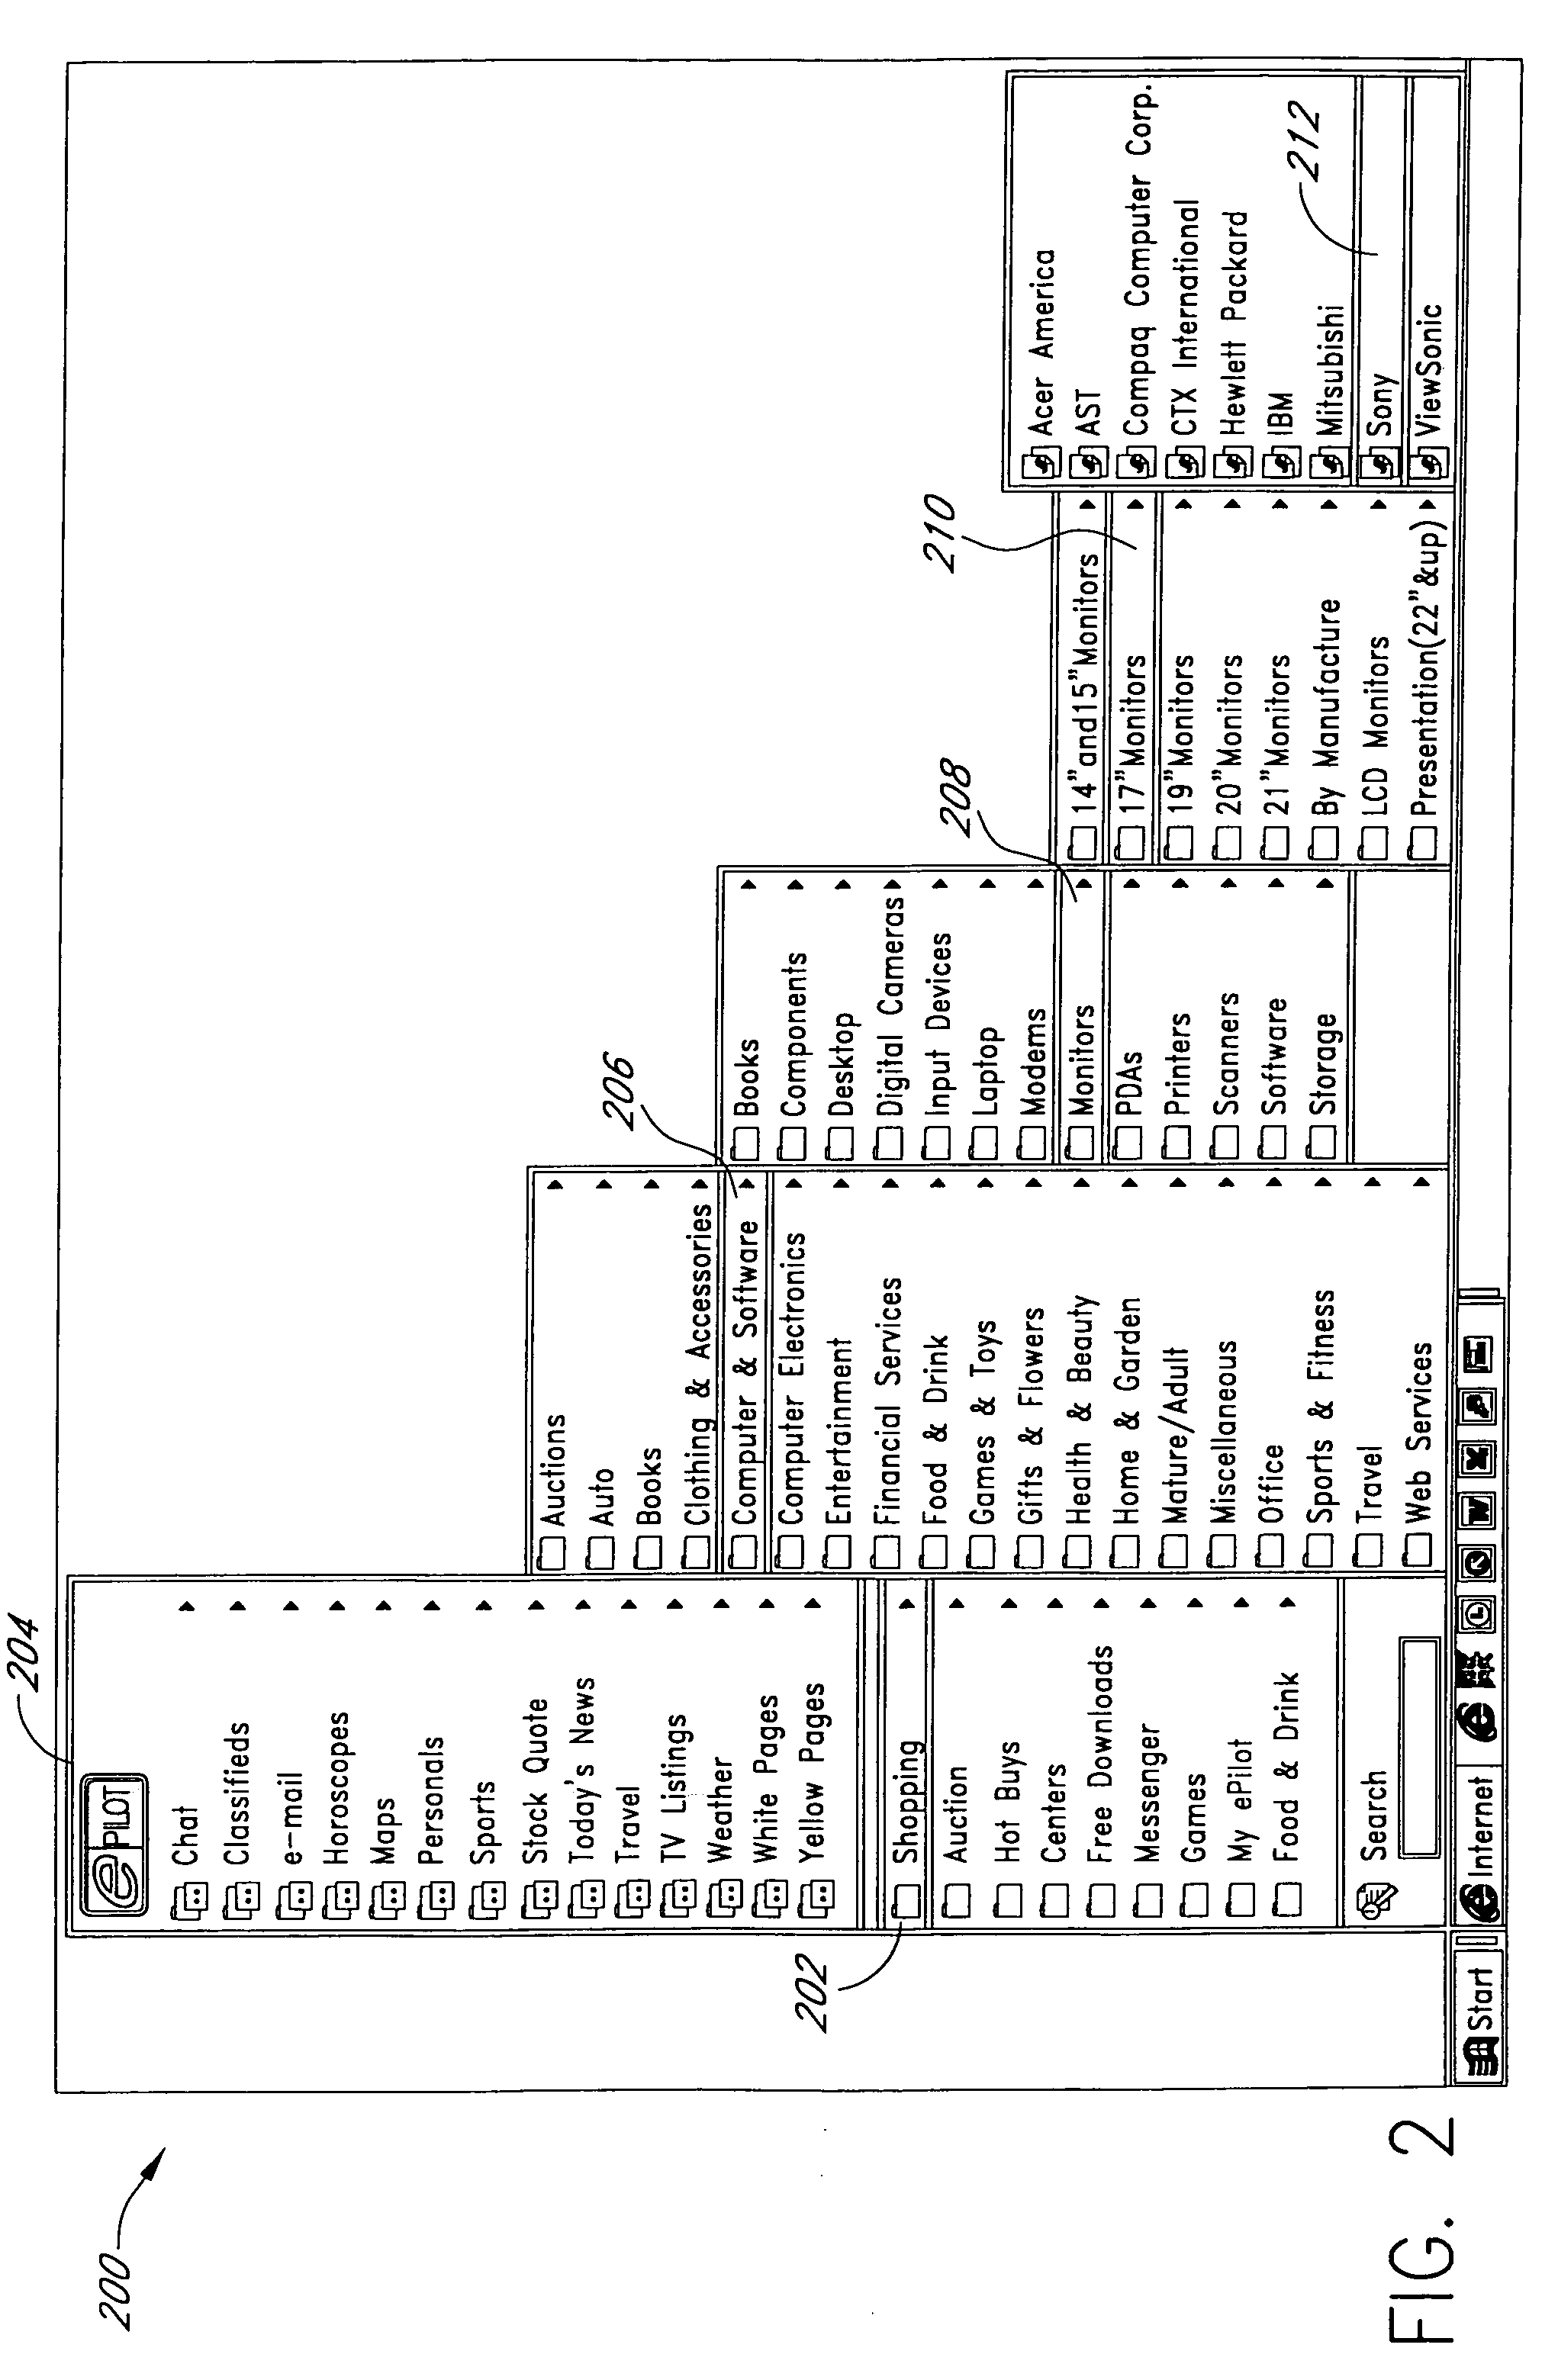 System and method for generating a search query using a category menu